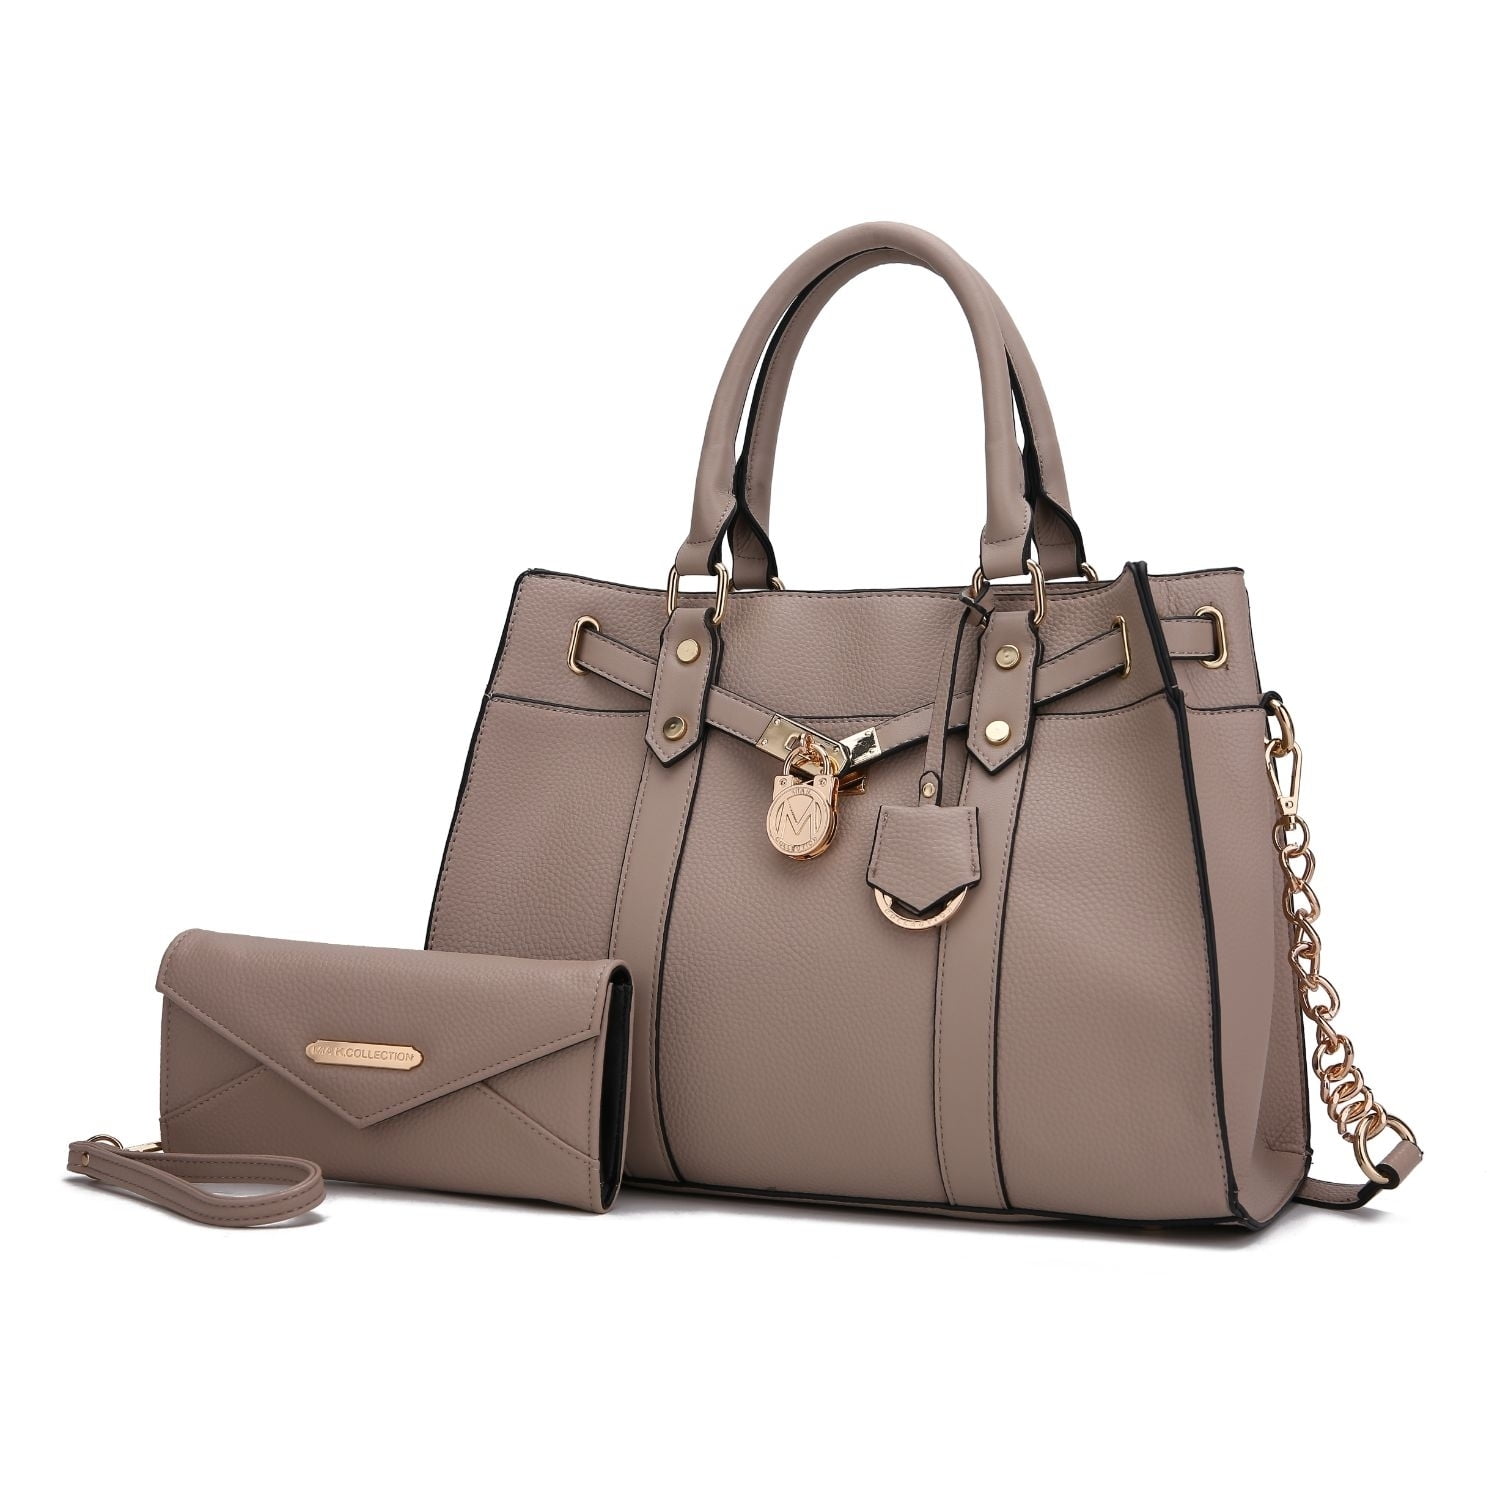 Christine Price Bag In Women's Bags & Handbags for sale